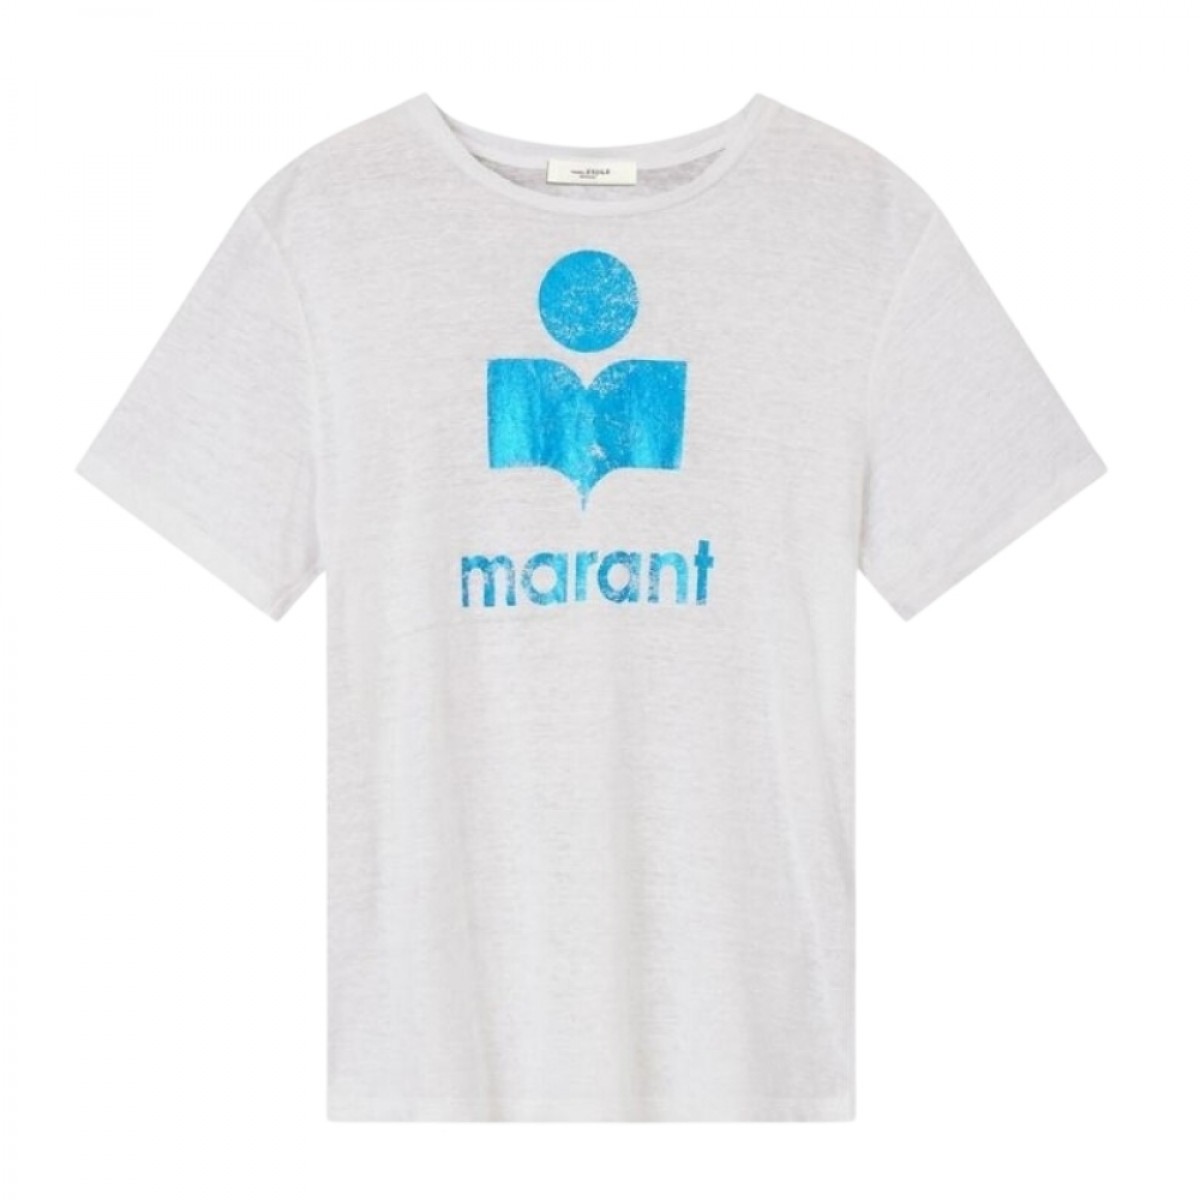 koldi t-shirt - white with blue - front